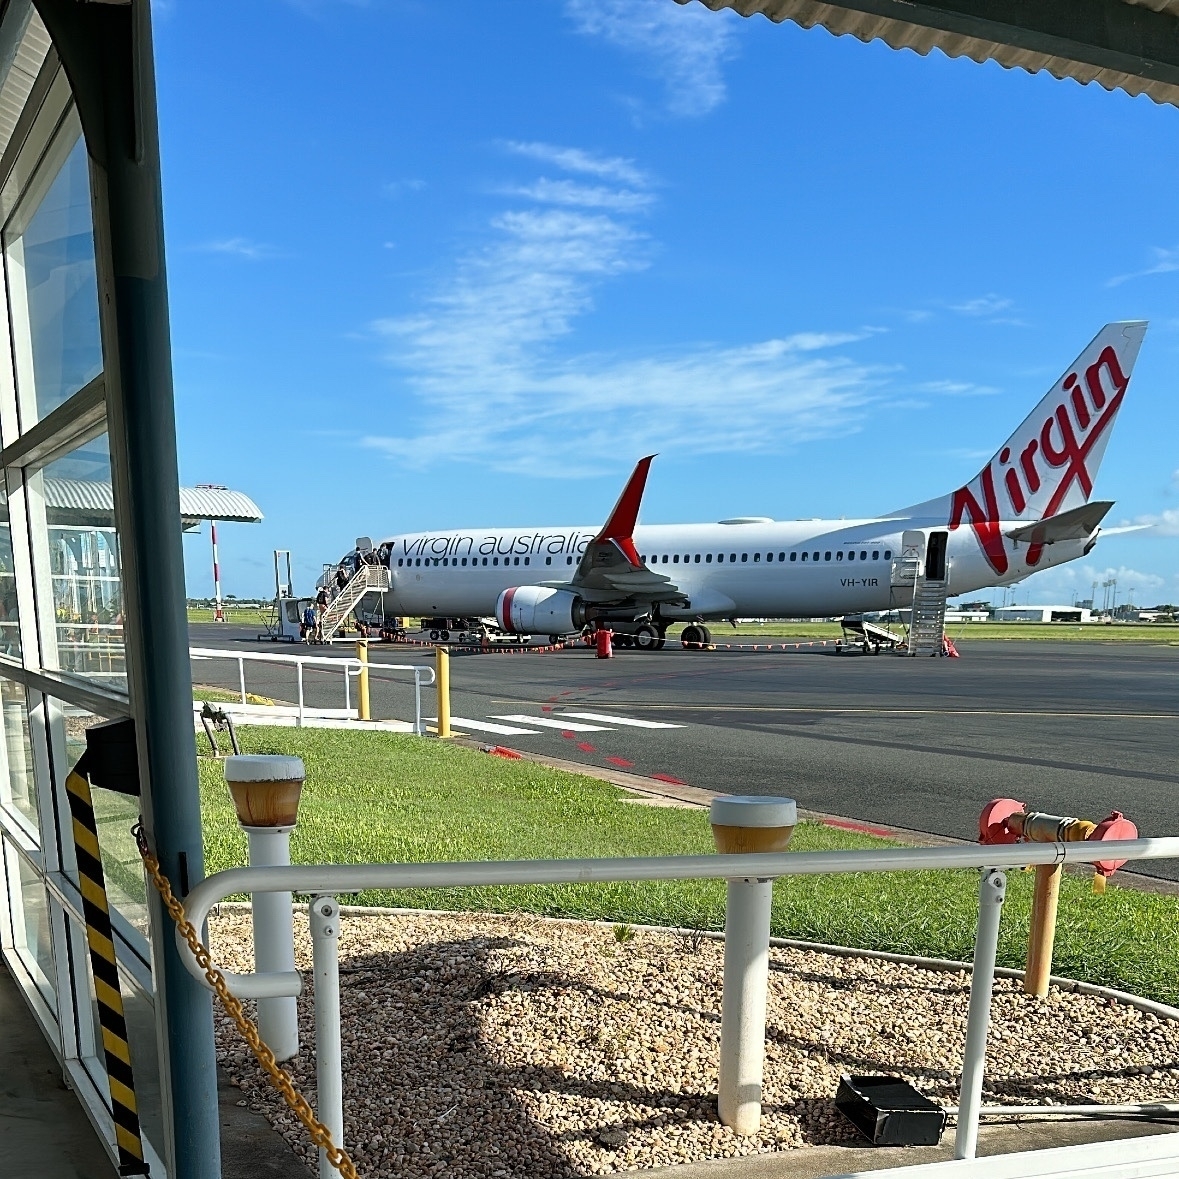 A view of a Virgin Australia plane on the tarmac taken from the boarding area. Entry stairs are at the front and rear of the plane. The plane is white with a red Virgin on the tail. A bright blue sky is visible.